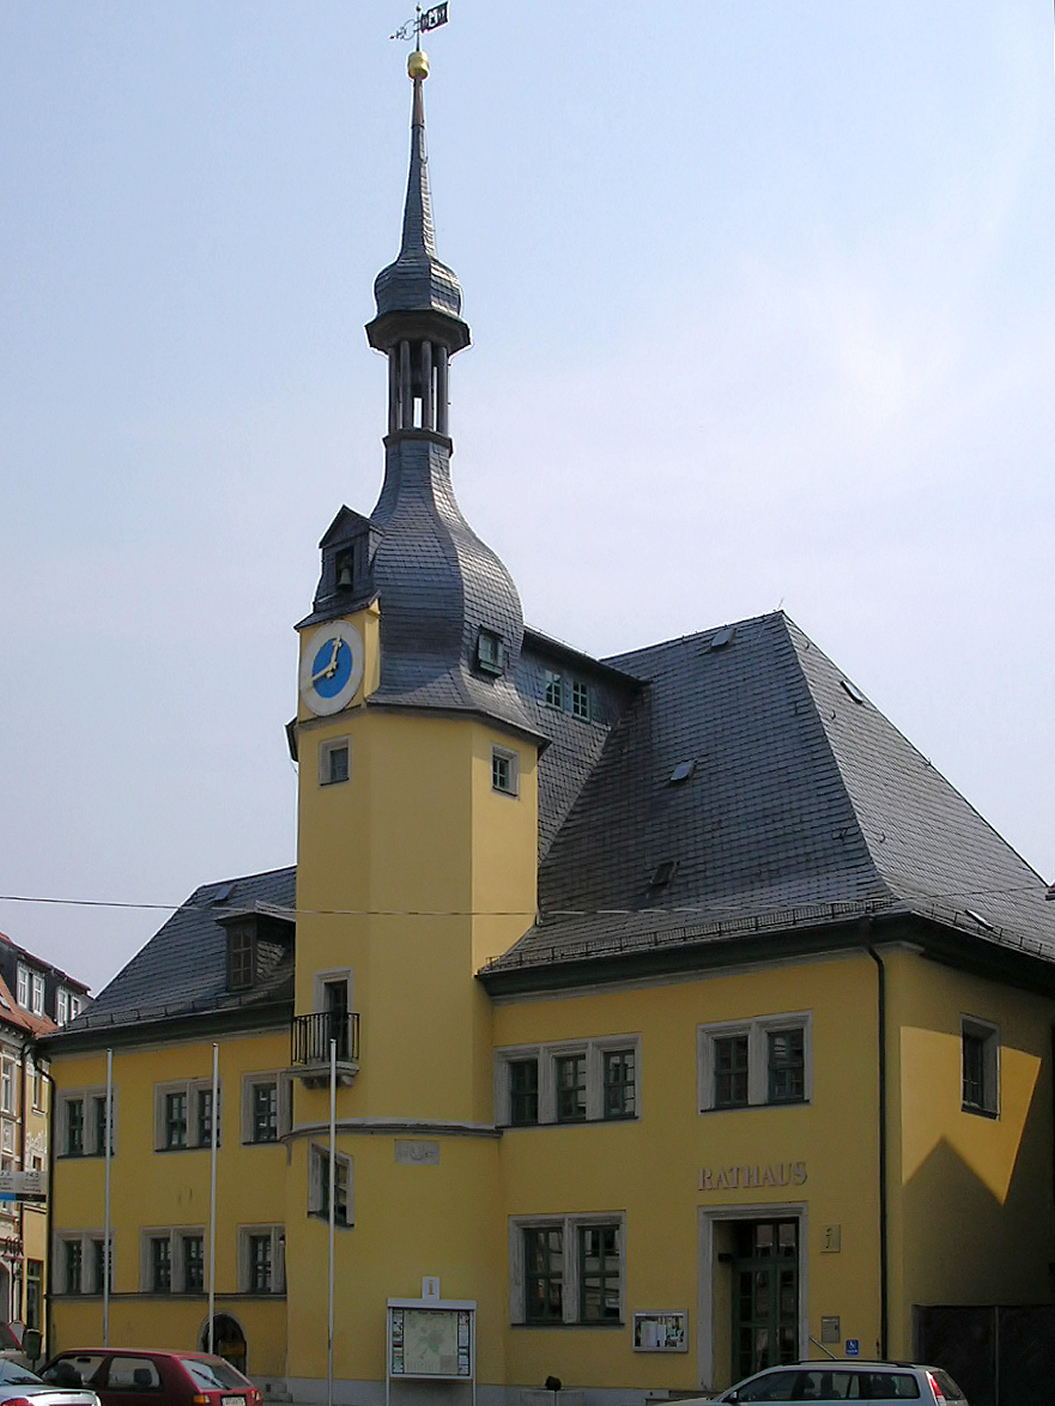 "Rathaus Apolda" by Michael Sander - Self-photographed. Licensed under CC BY-SA 3.0 via Wikimedia Commons - https://commons.wikimedia.org/wiki/File:Rathaus_Apolda.JPG#/media/File:Rathaus_Apolda.JPG